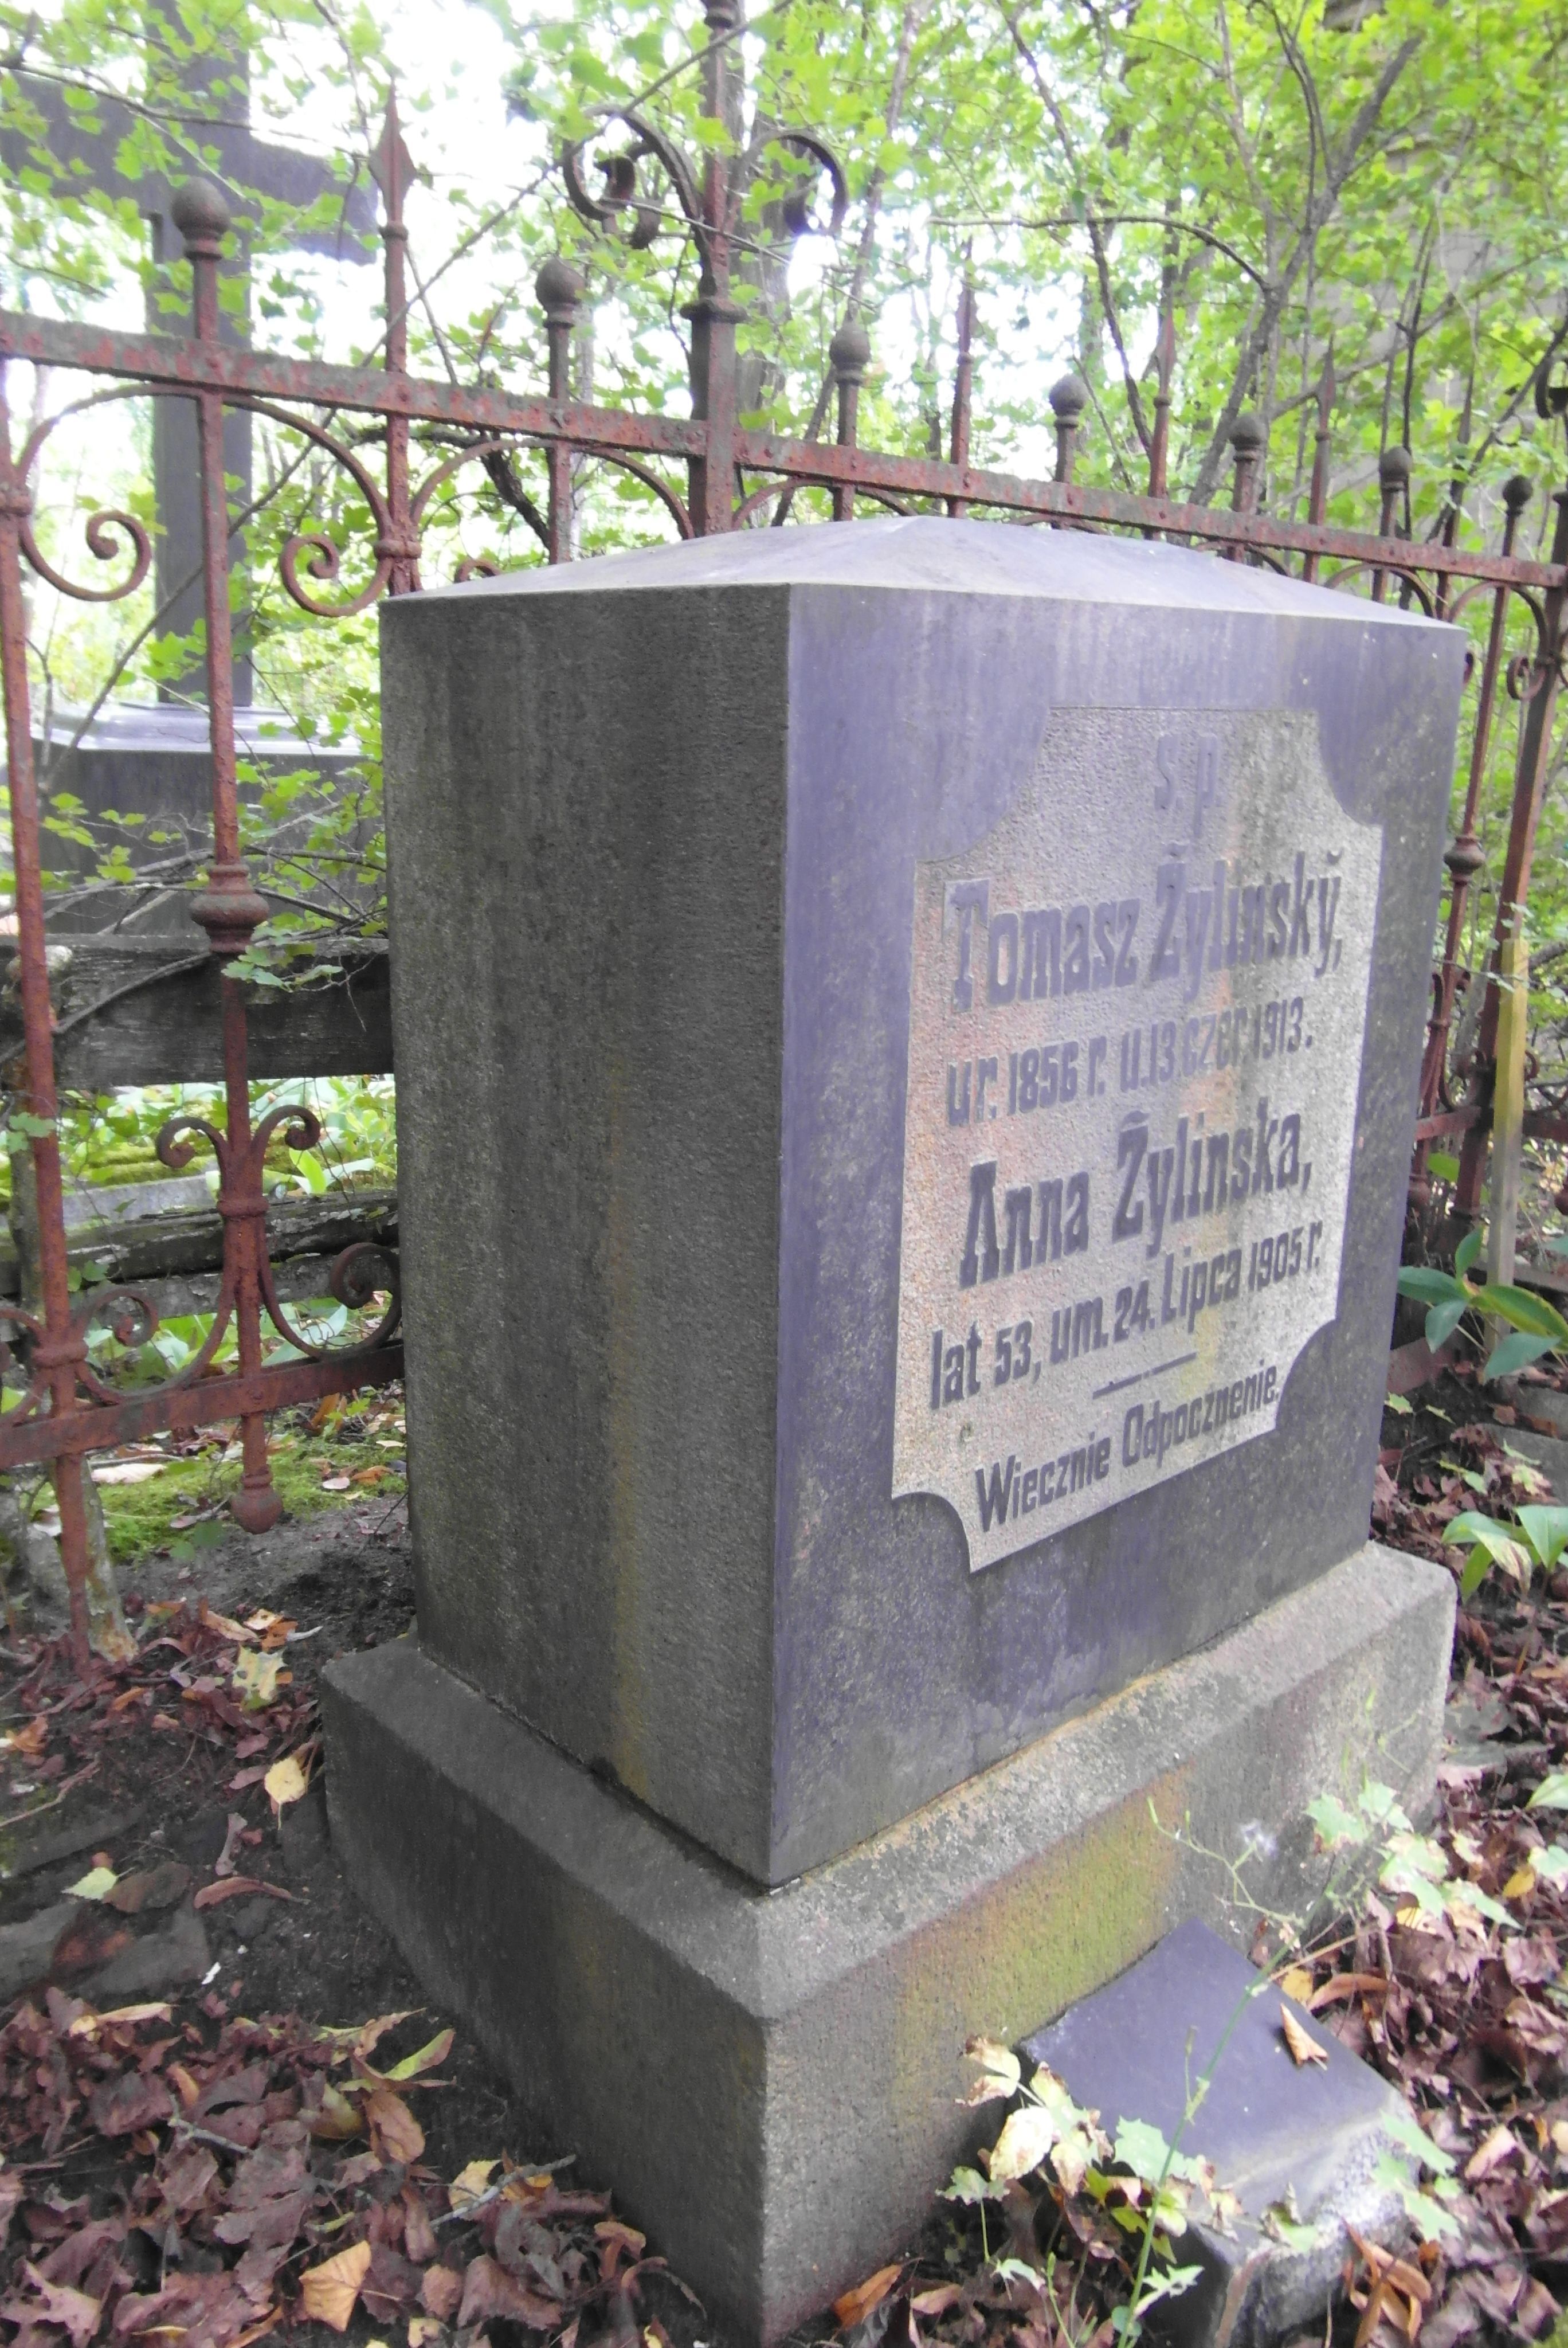 Tomas Žylinsky tombstone, St Michael's cemetery in Riga, as of 2021.